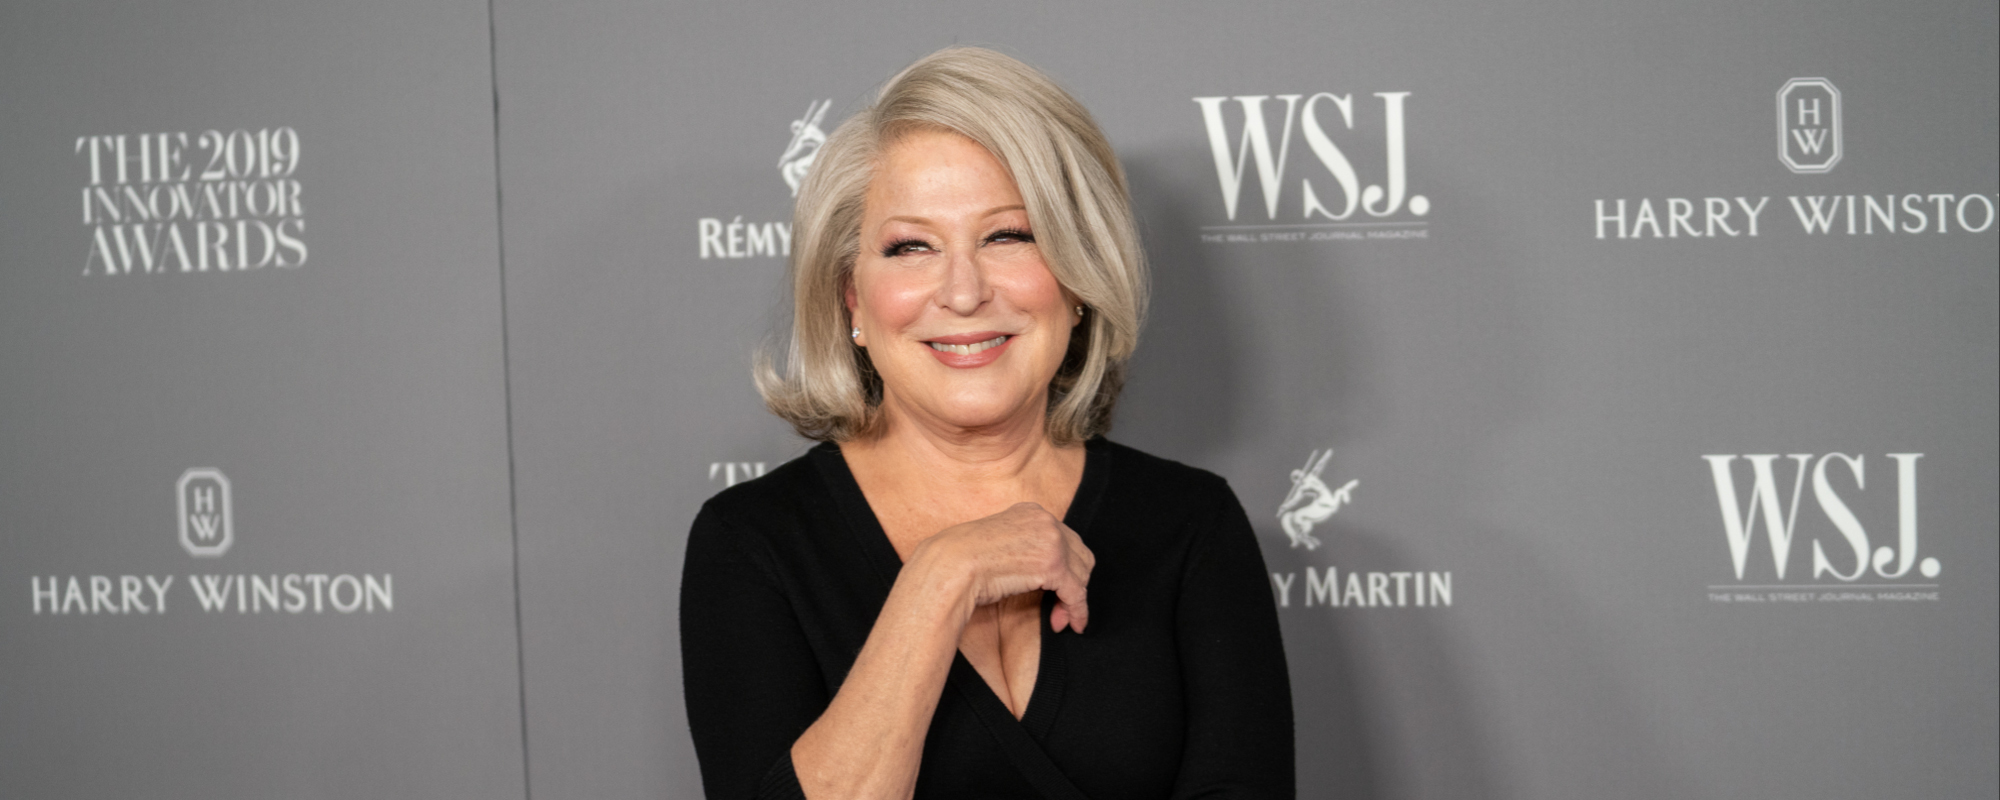 Bette Midler Posts Apology for Calling West Virginians “Poor” and “Illiterate”